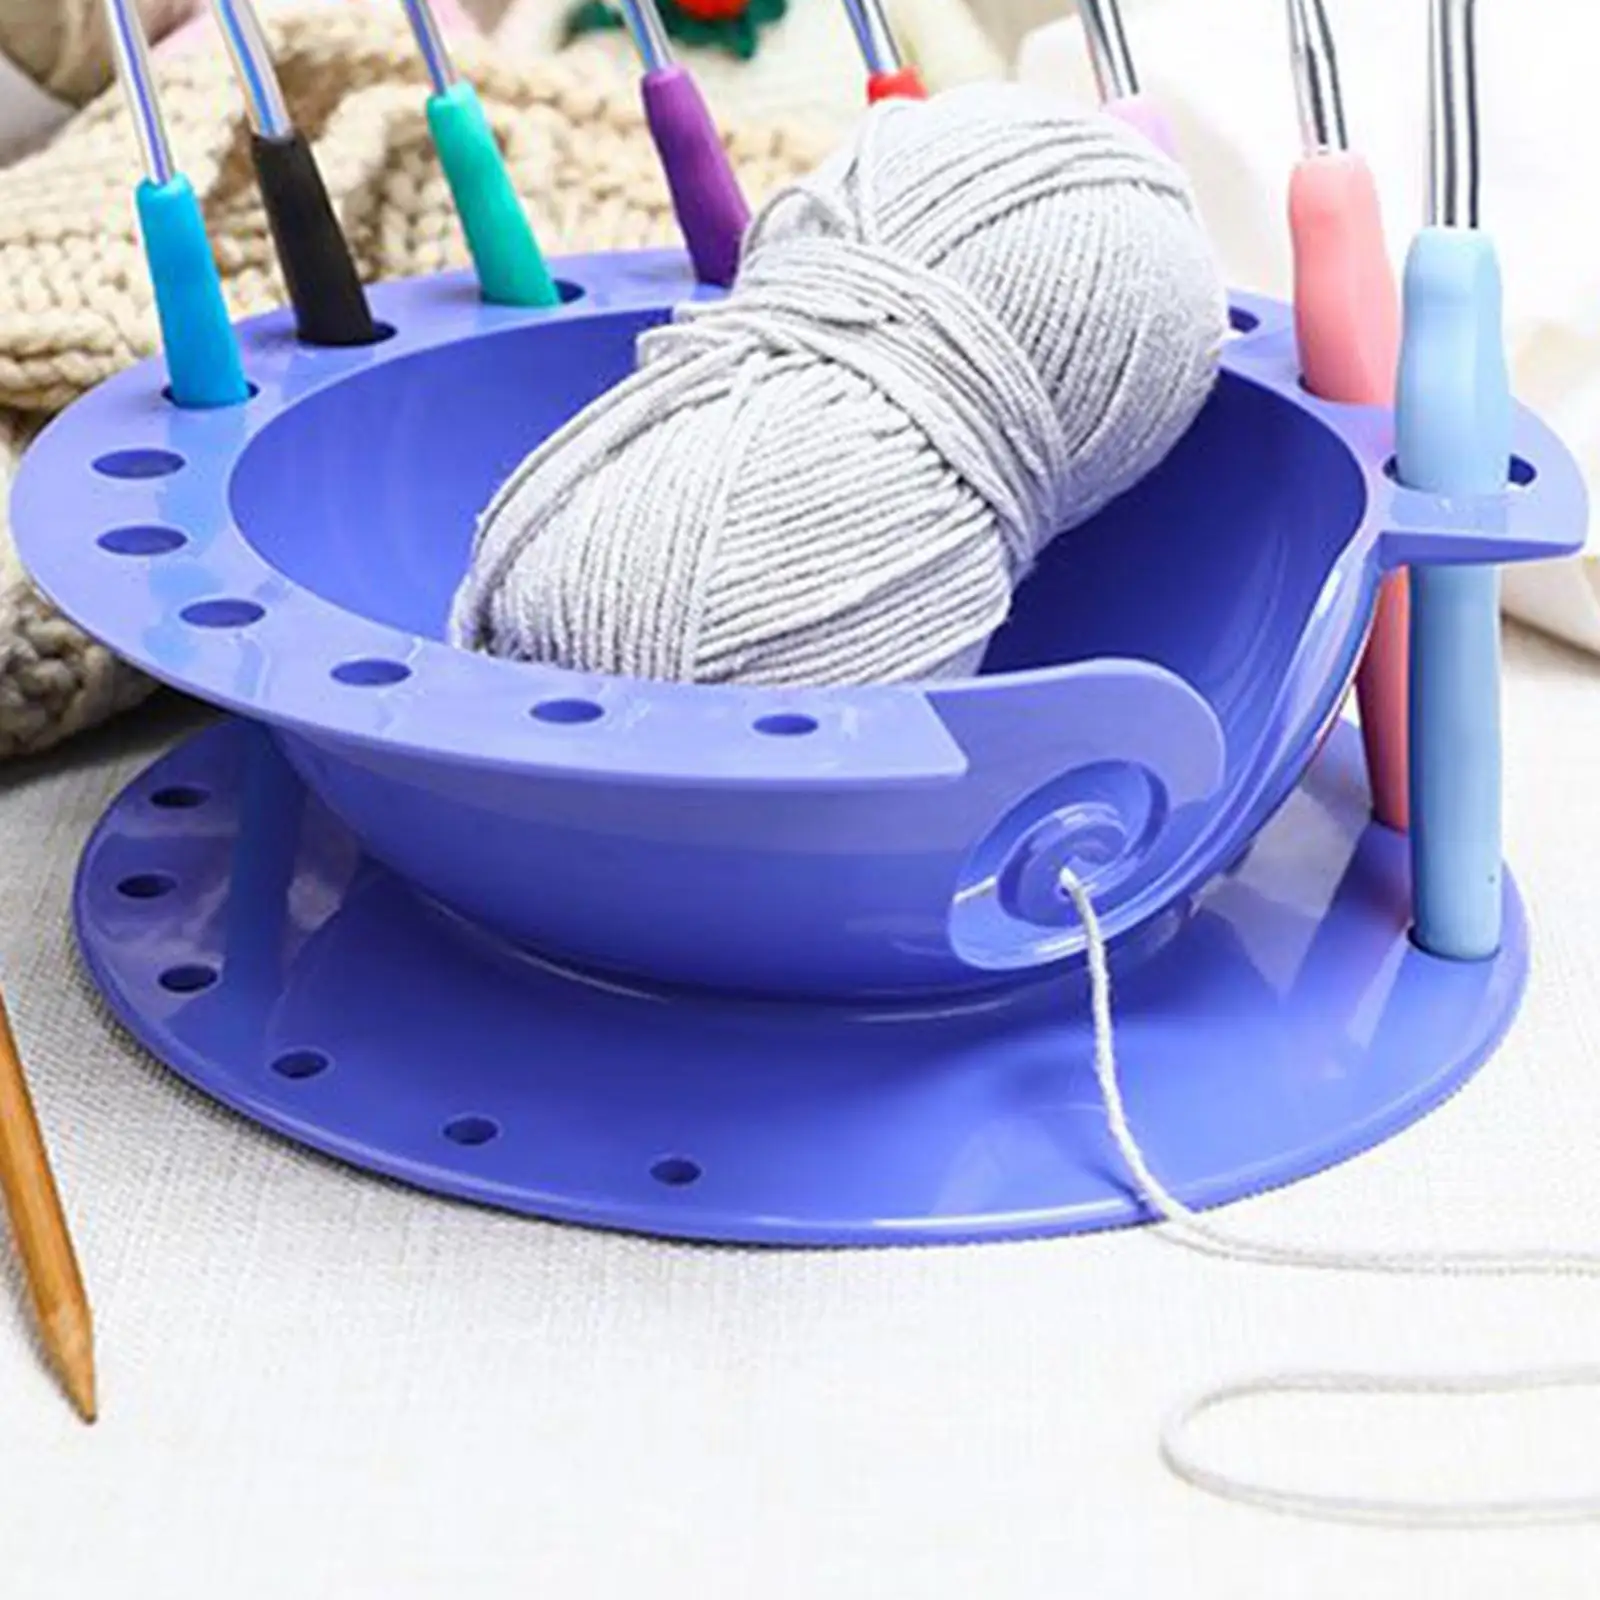 Yarn Bowl Holder Durable Handmade Crocheters Round Knitting Wool Storage Basket Round for Knitter Mother`S Day Crocheting Sewing